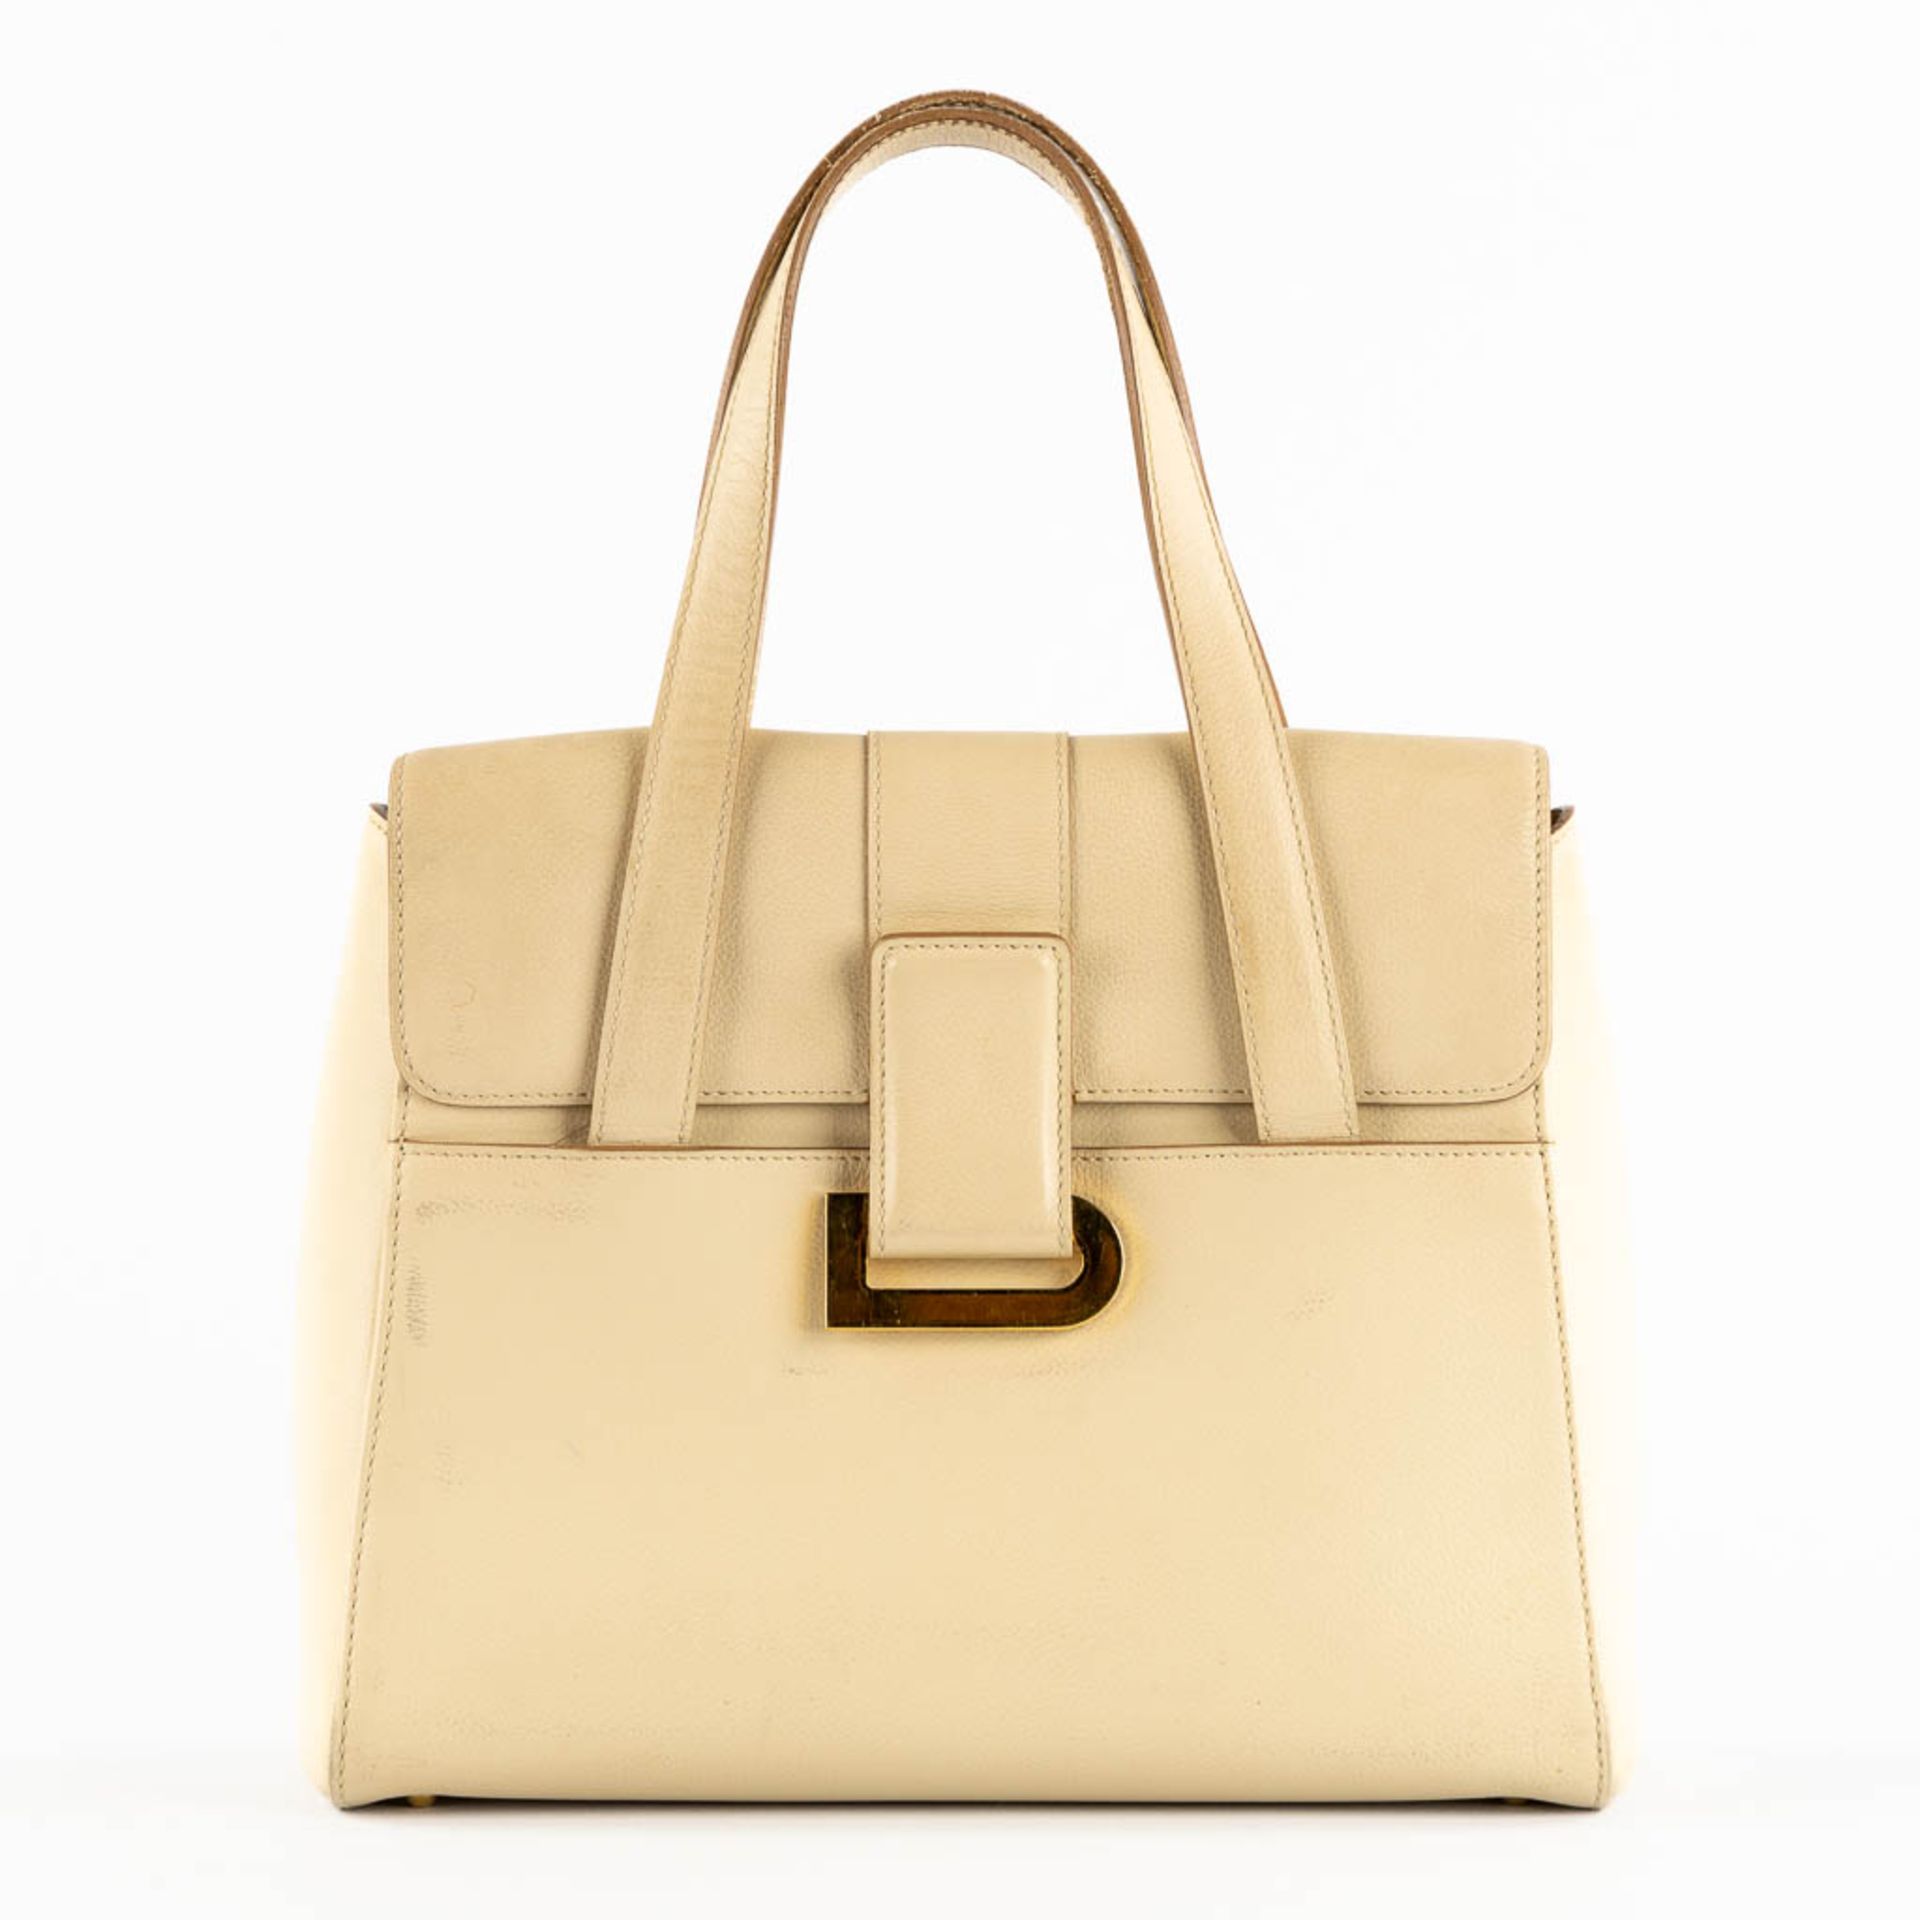 Delvaux model 'Reverie' Jumping, Ivoire. Ivory coloured leather. (L:11 x W:28 x H:23 cm) - Image 4 of 20